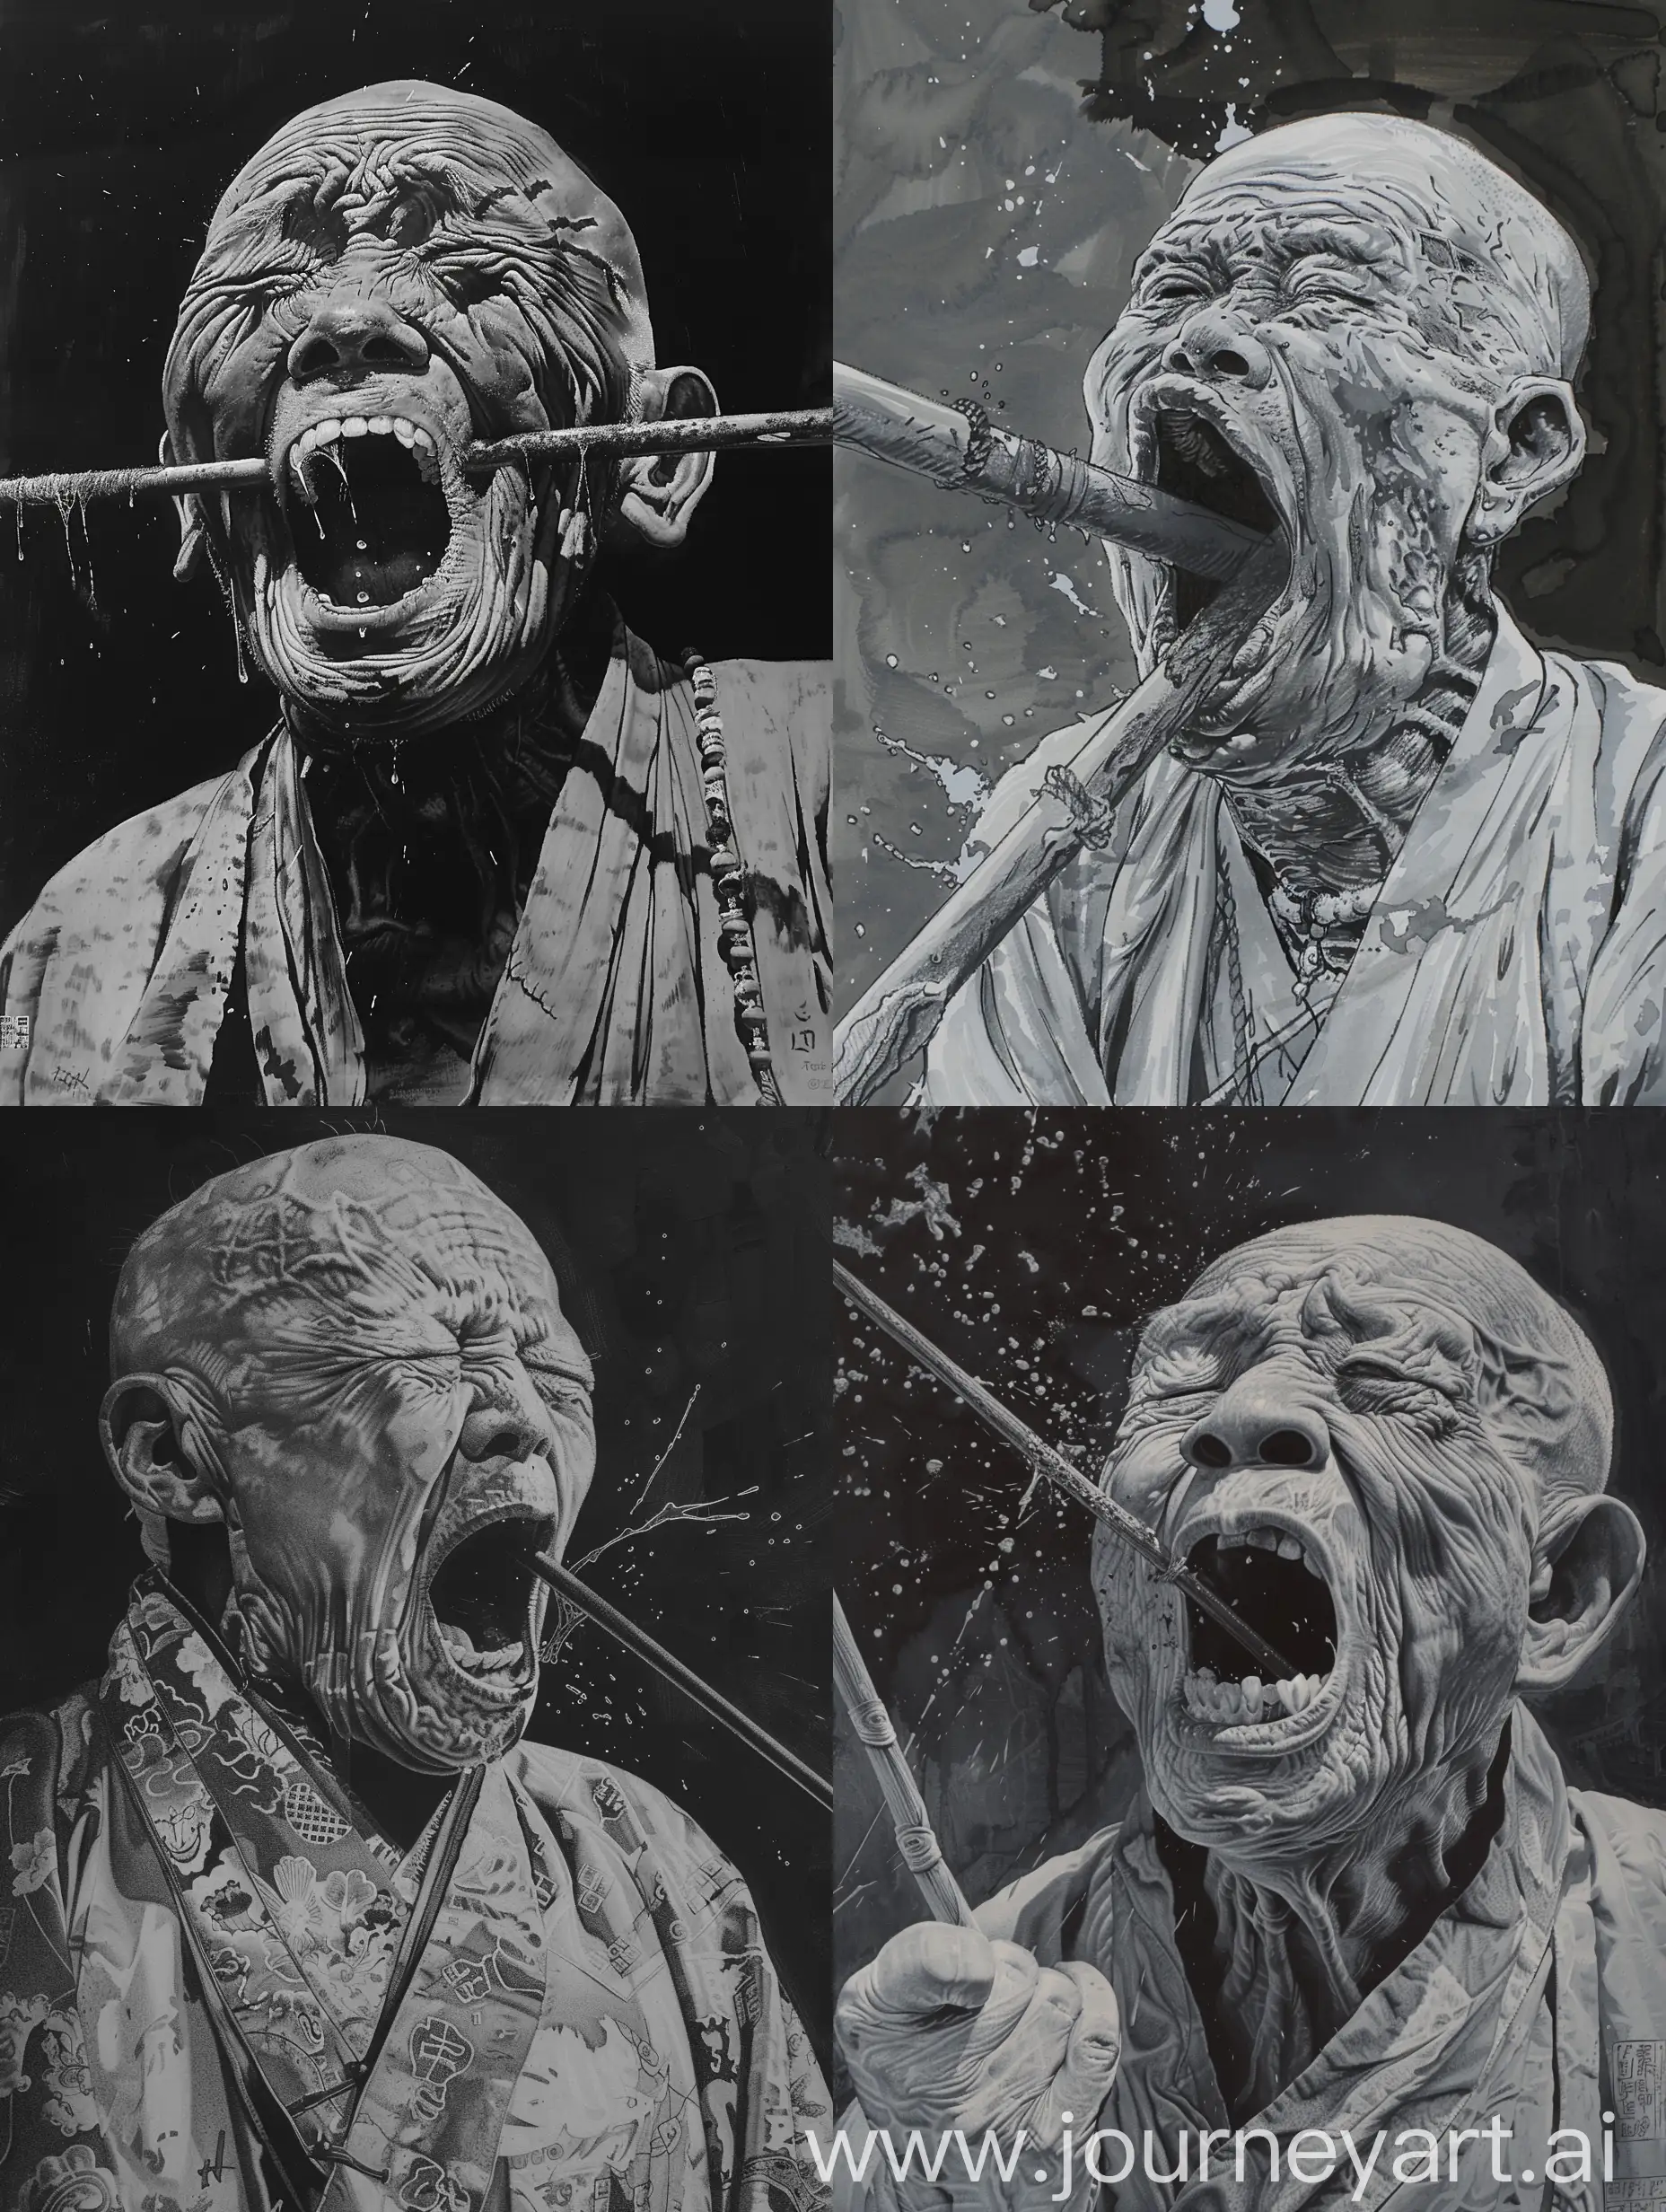 Close focus, painting full of impact, gray tone, an old Chinese man wearing Taoist robes, stuffing an iron rod into his mouth, swallowing swords, acrobatics, opening his mouth, exposing his teeth, ferocious, scary, wrinkled, serious, Taoist religious style, solemn, splash ink style, complex lines, ink horror comic style, ink painting, indoor scene at night, in the style of dc Comics, Ross Tran's style, high quality photos, rough horror comics, in the style of graphic novels, in the style of science fiction animations, in the style of jarek kubicki, with fine shading